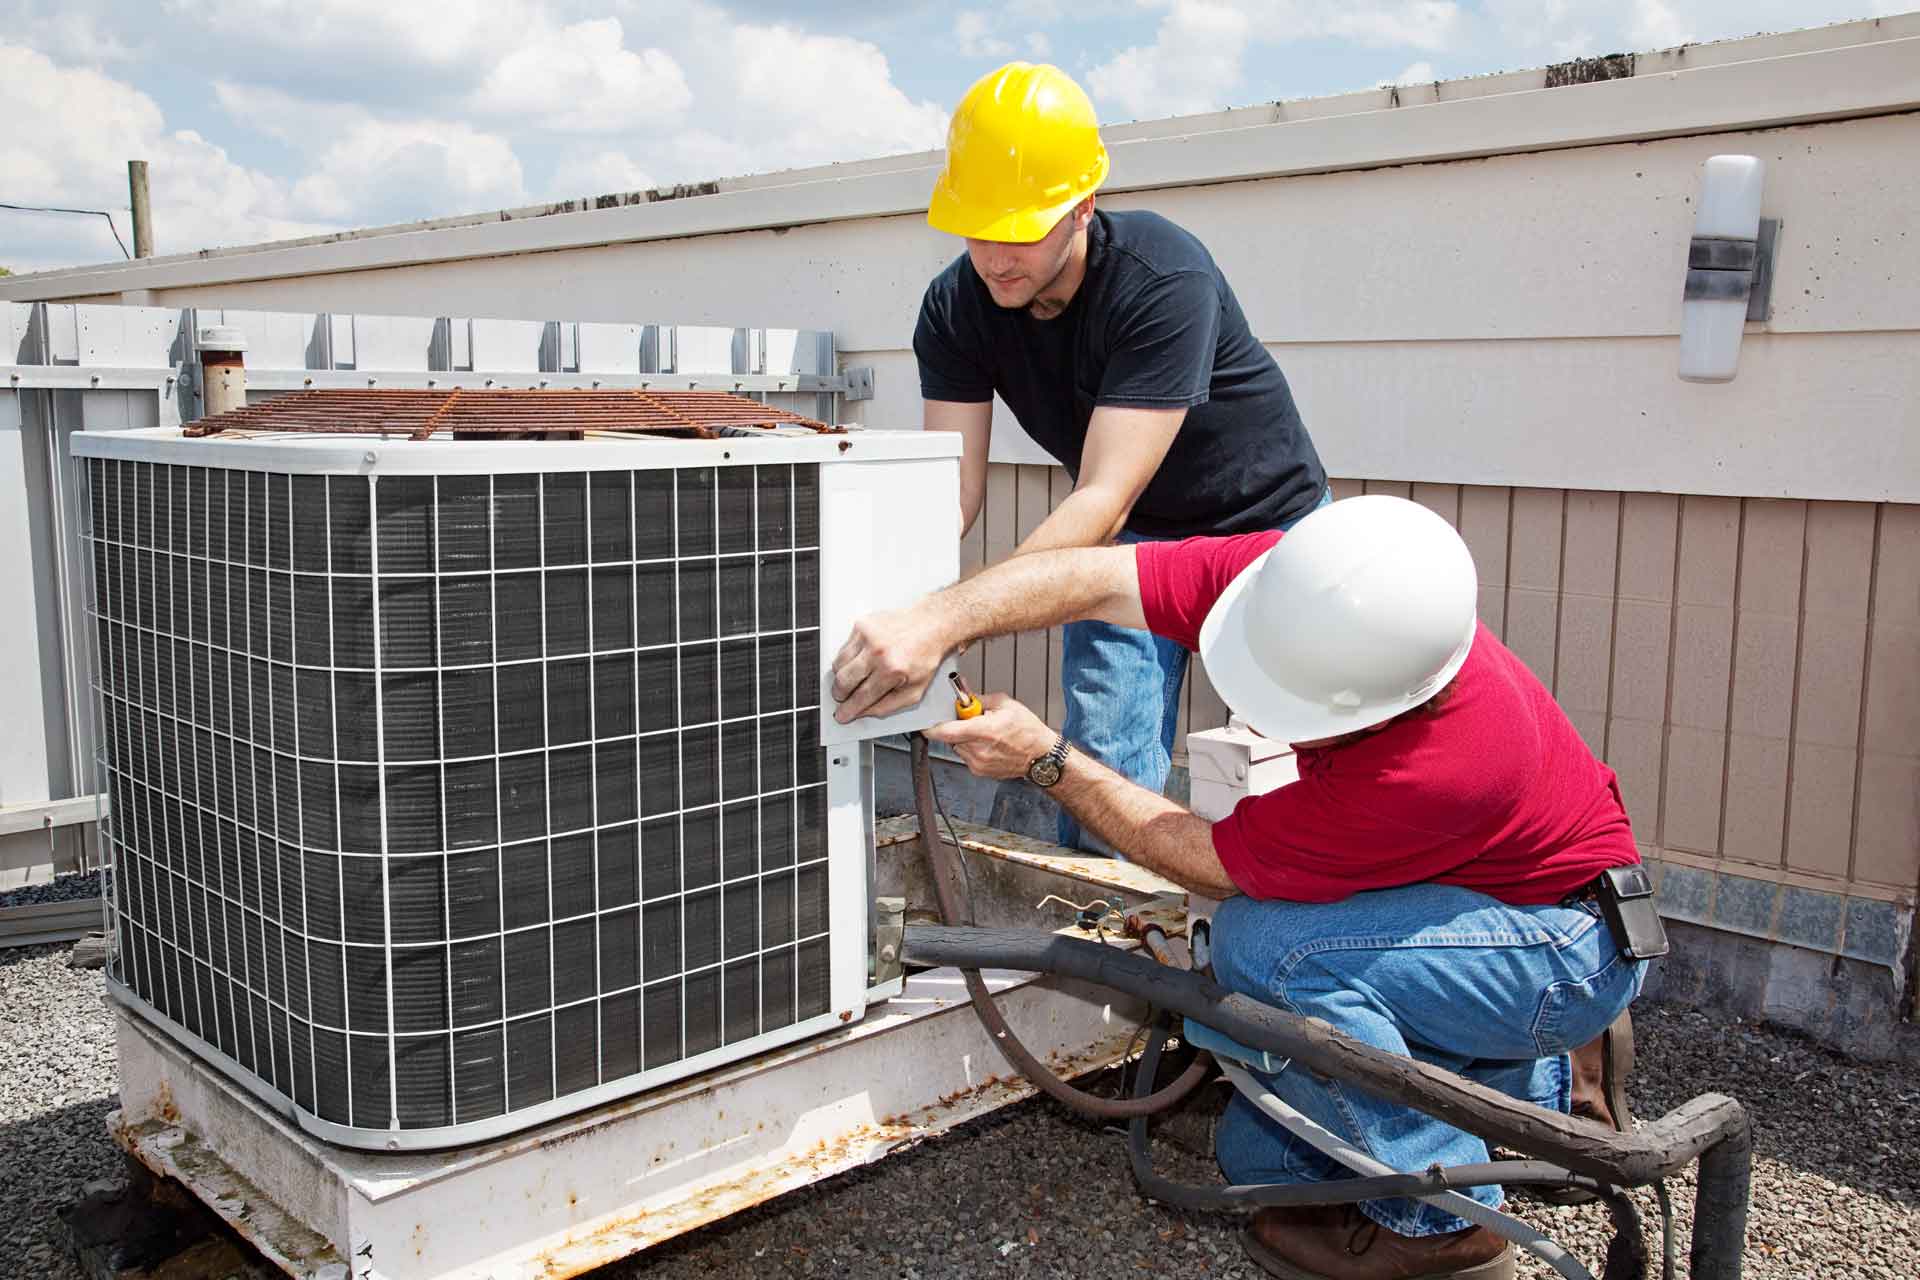 Two HVAC technicians work on an air conditioning unit